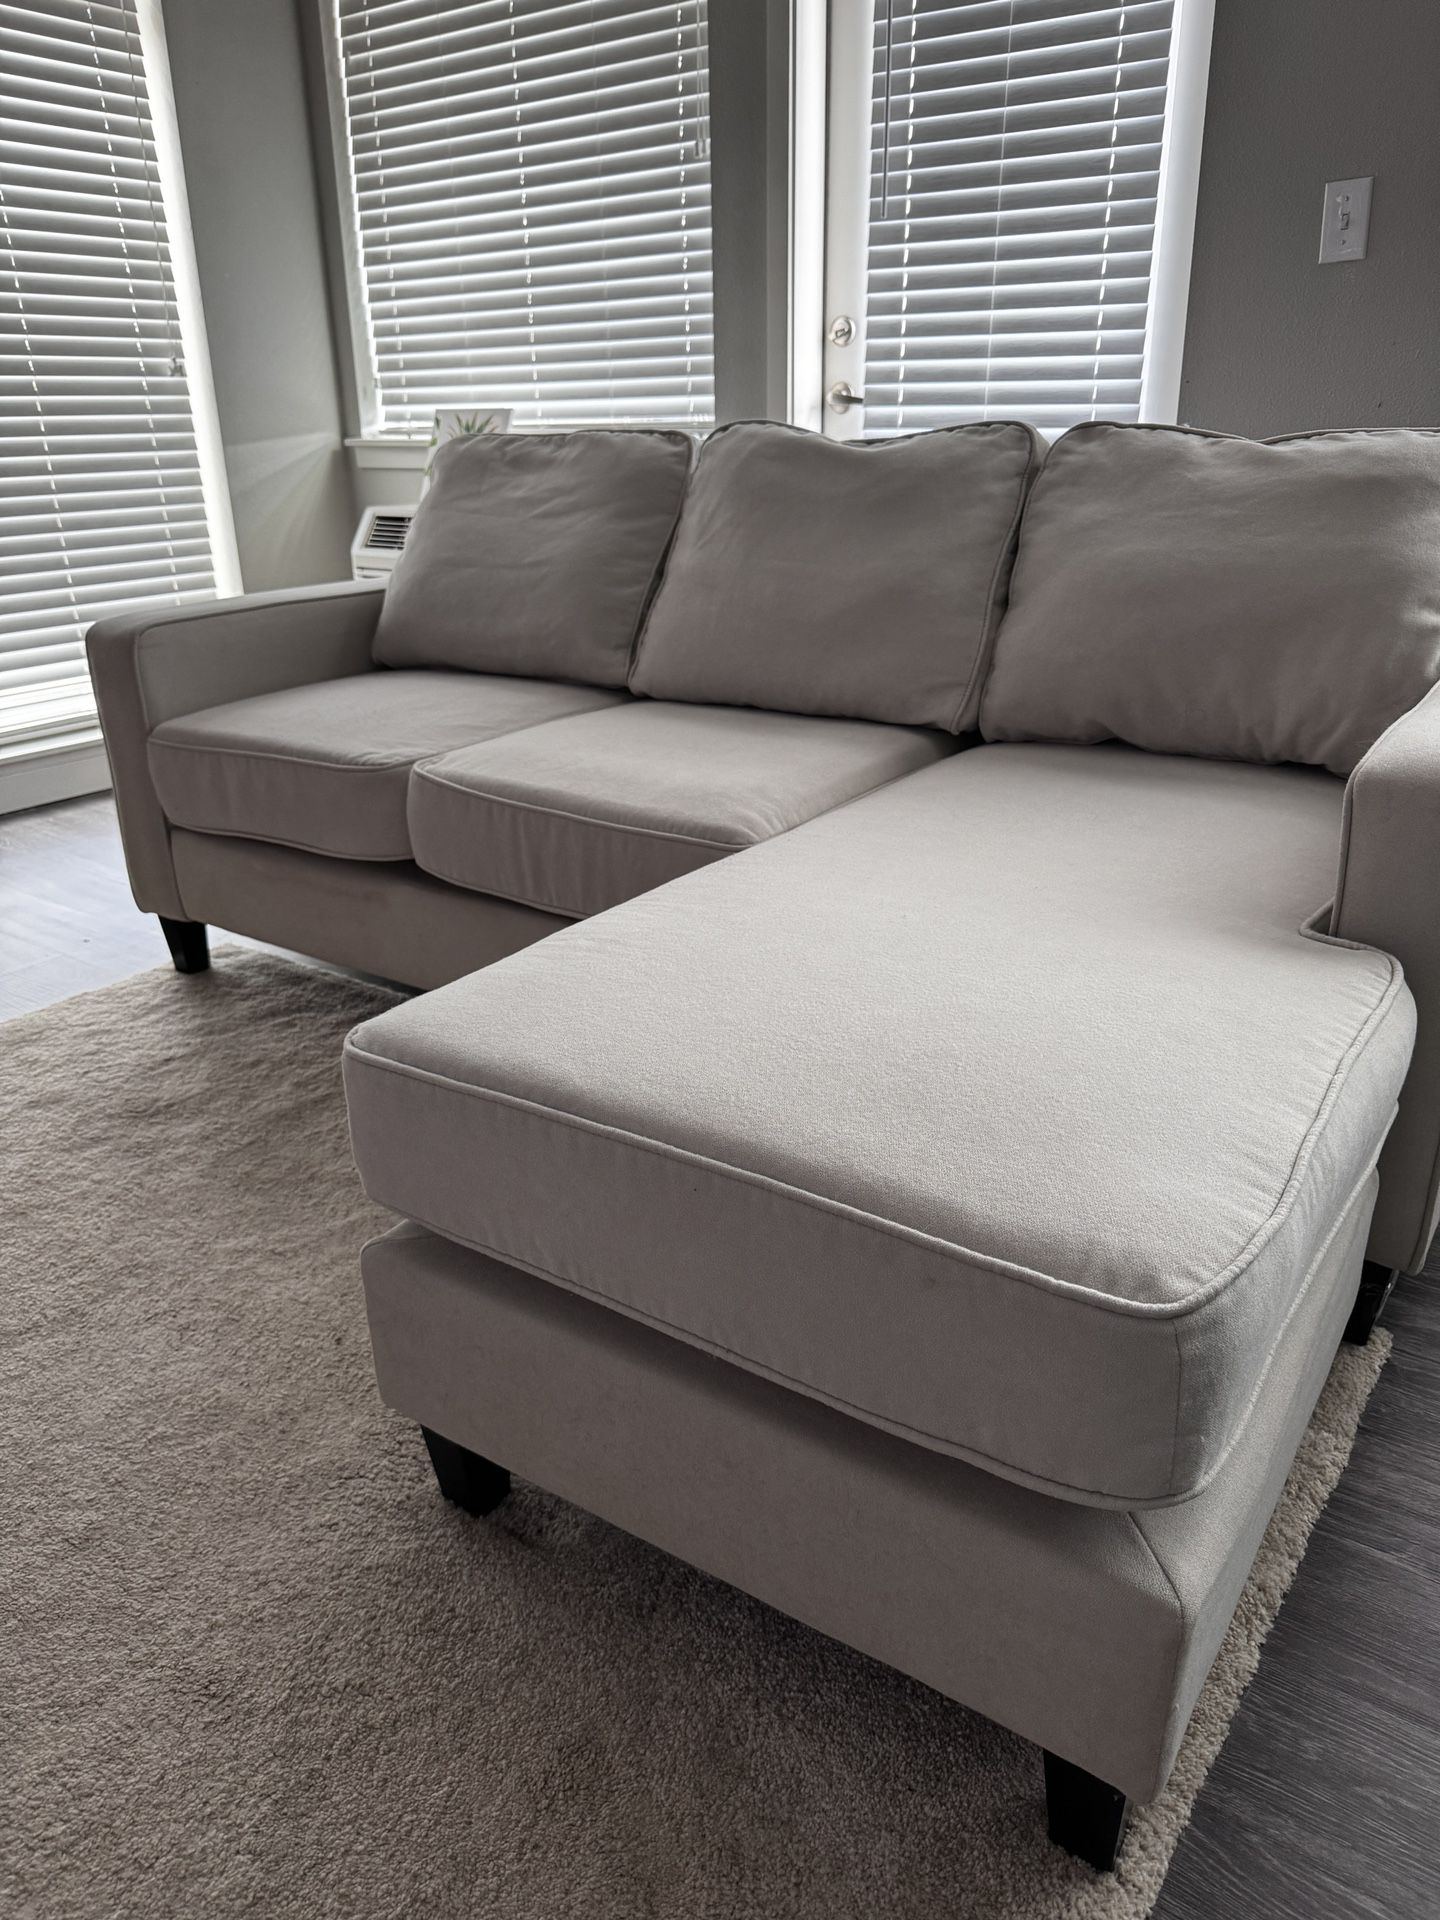 Light Beige Modern Sofa: Relocation Sale, Pickup Required